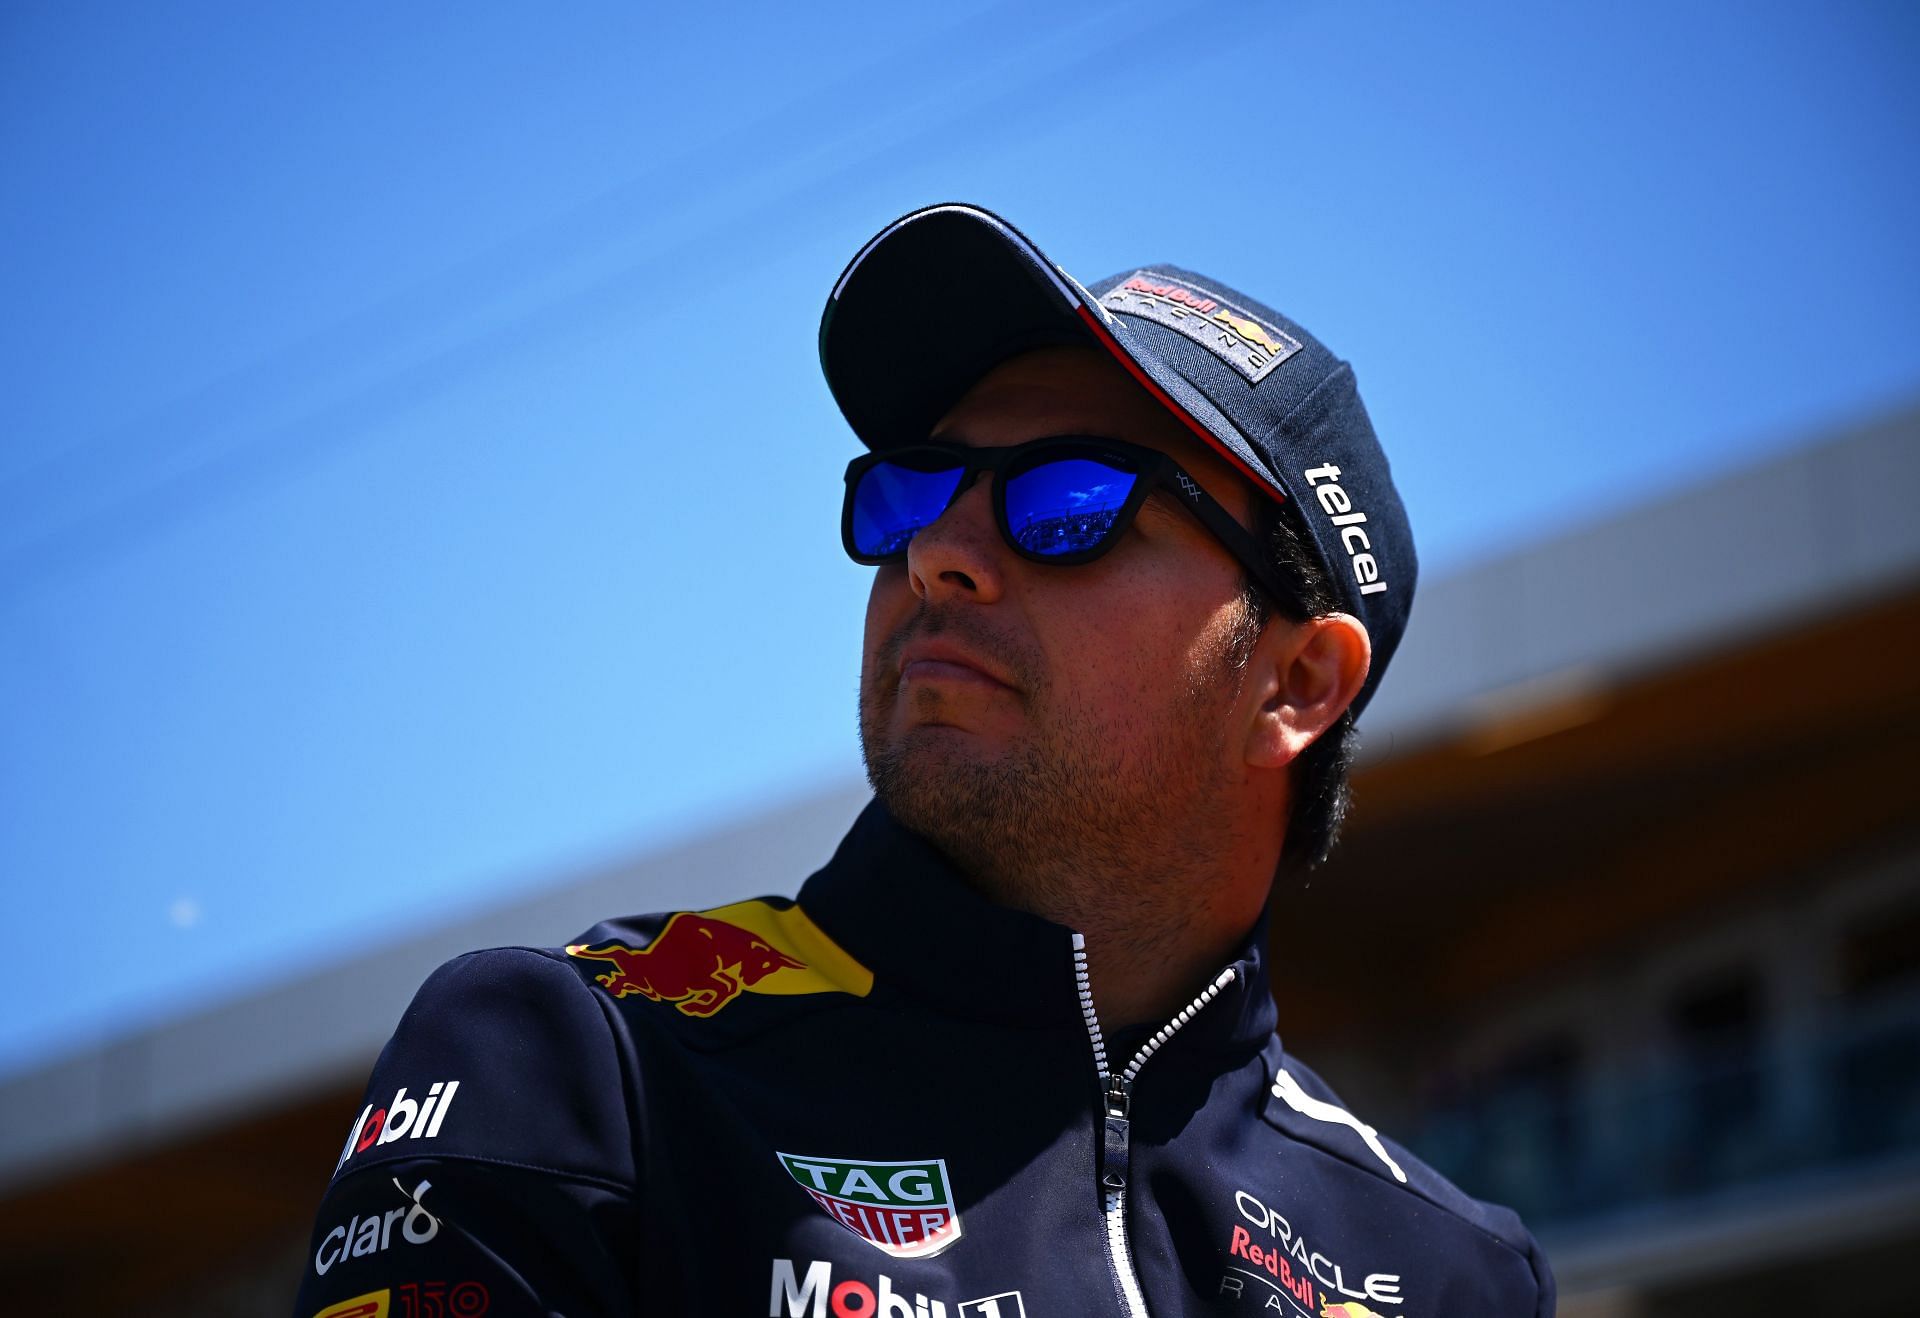 Red Bull driver Sergio Perez photographed during the 2022 F1 Canadian GP weekend (Photo by Clive Mason/Getty Images)